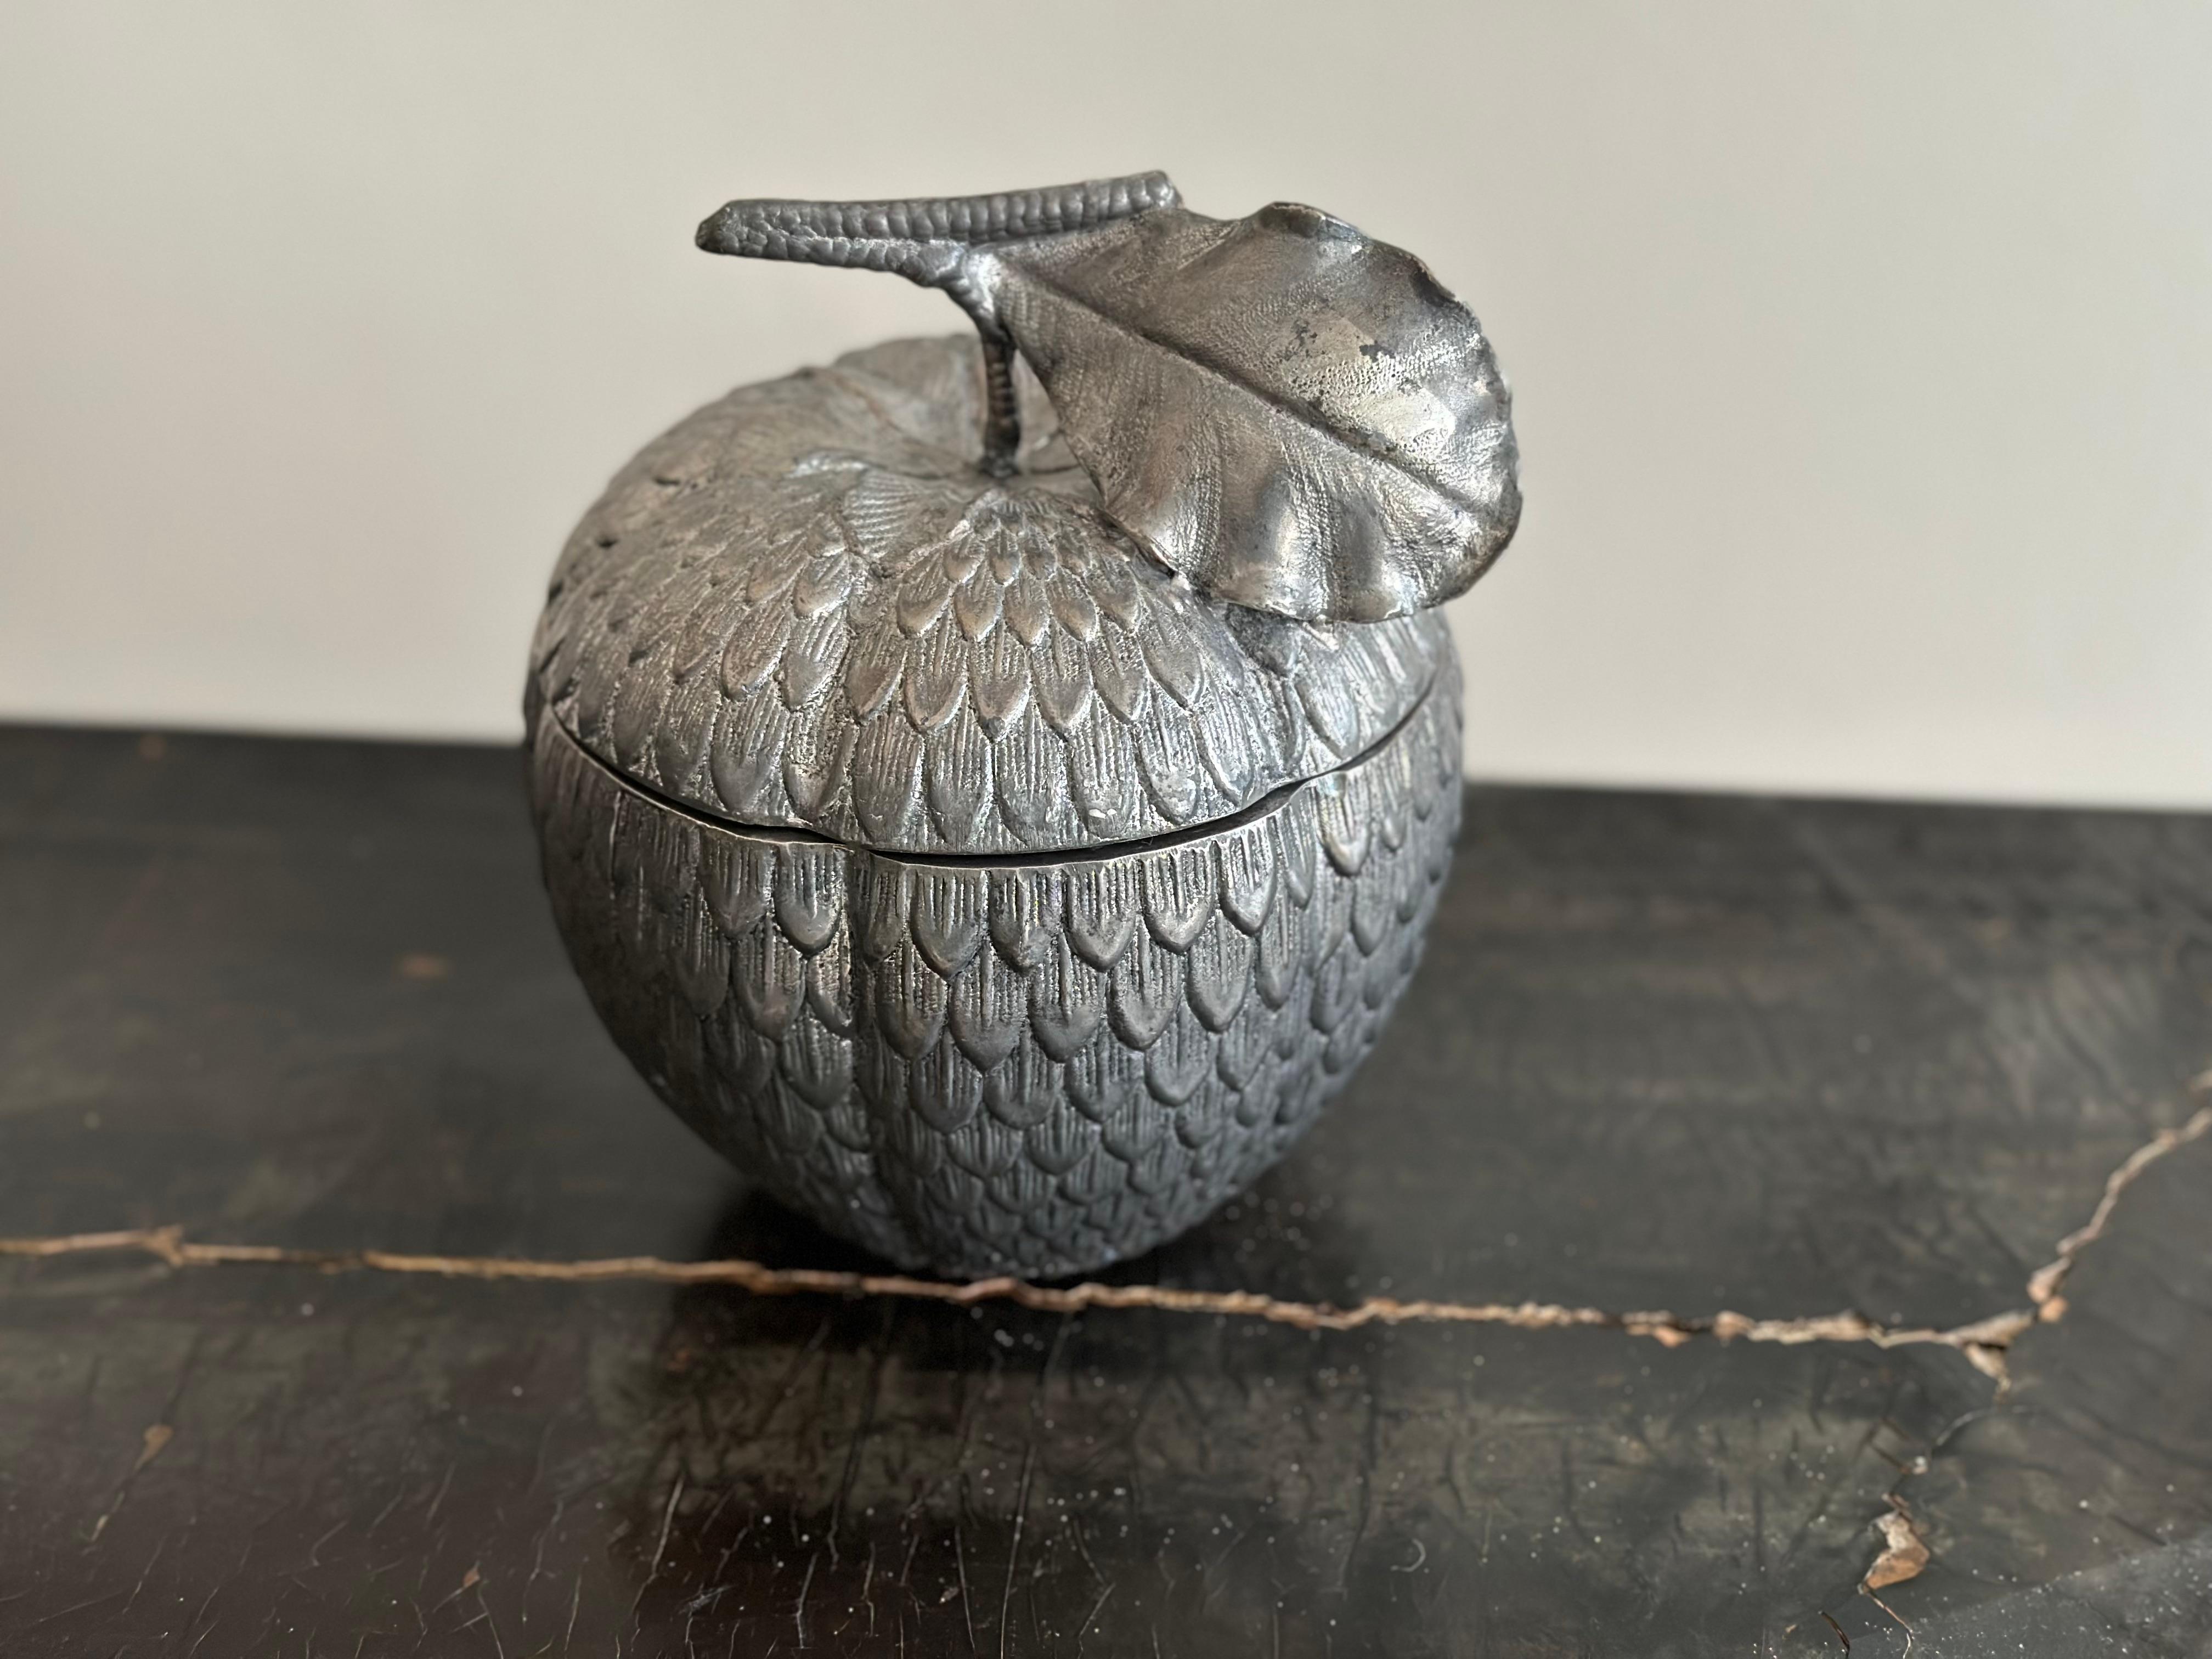 Very Rare Mauro Manetti Apple Ice Bucket from Florence, Italy, circa 1970

This exquisite ice bucket, shaped like a apple, is a true treasure from the 1960s. Crafted with meticulous care by the talented Italian artist Mauro Manetti in his workshop